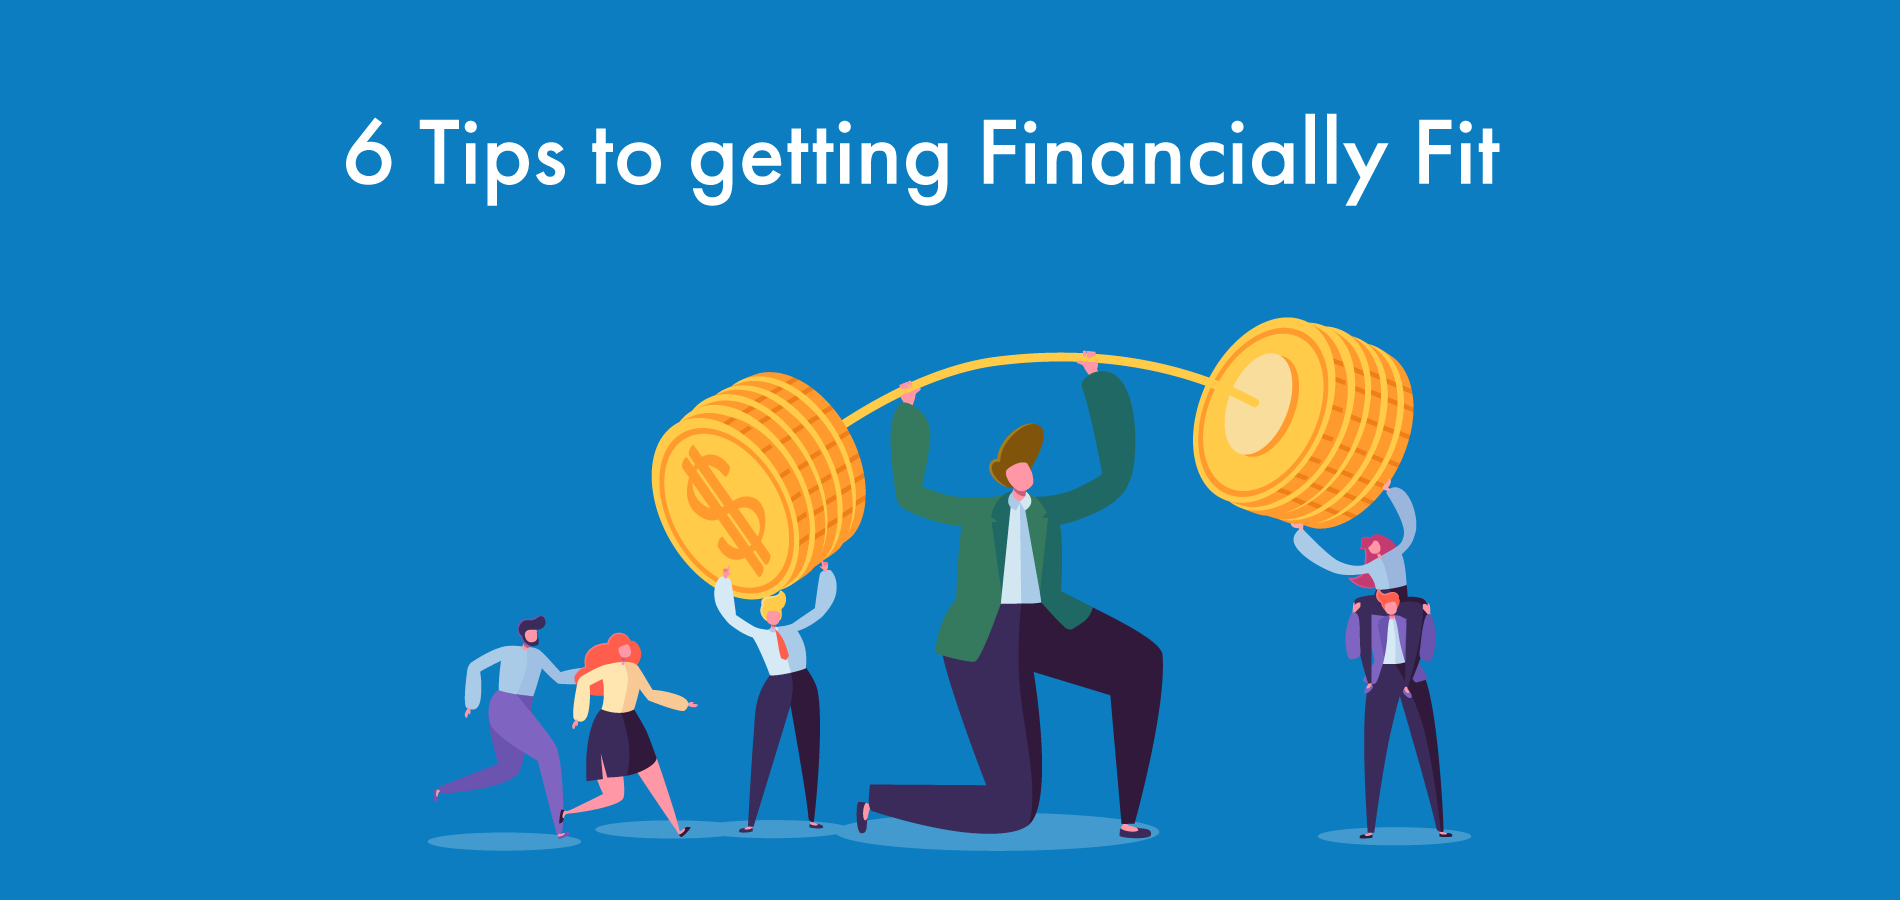 6 Tips to getting Financially Fit in the New Year